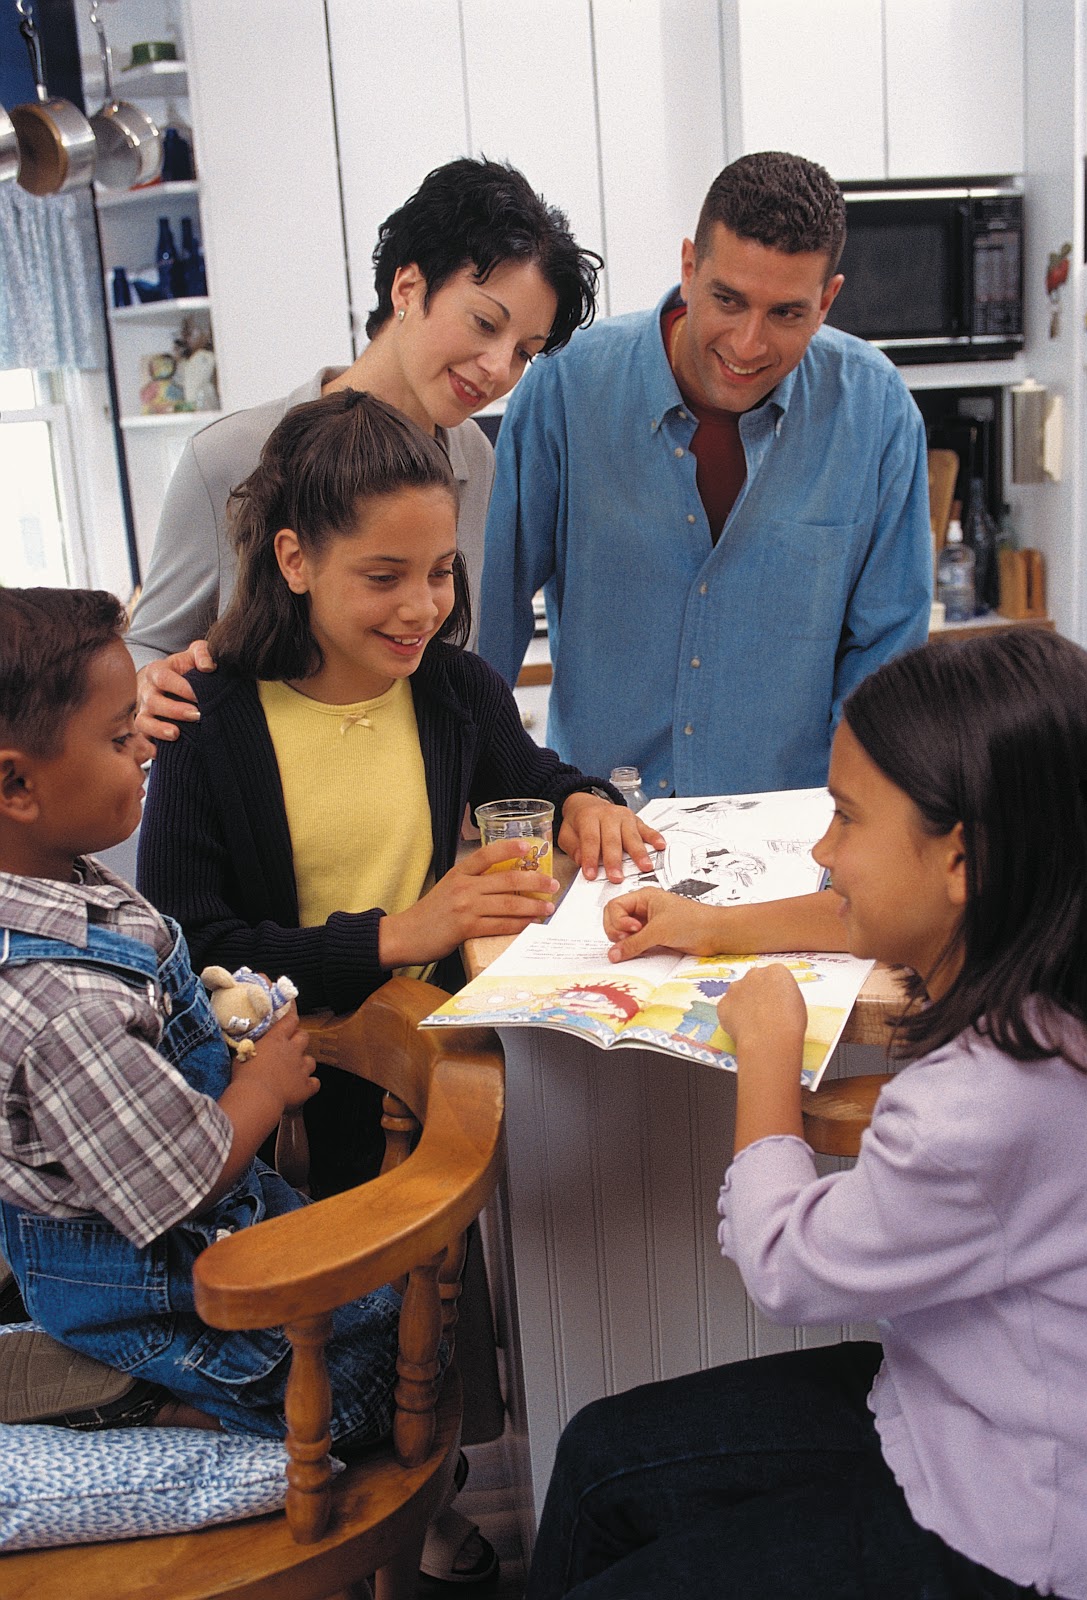 Family Activities That Can Teach Your Kids Find Out How To Be Responsible 4